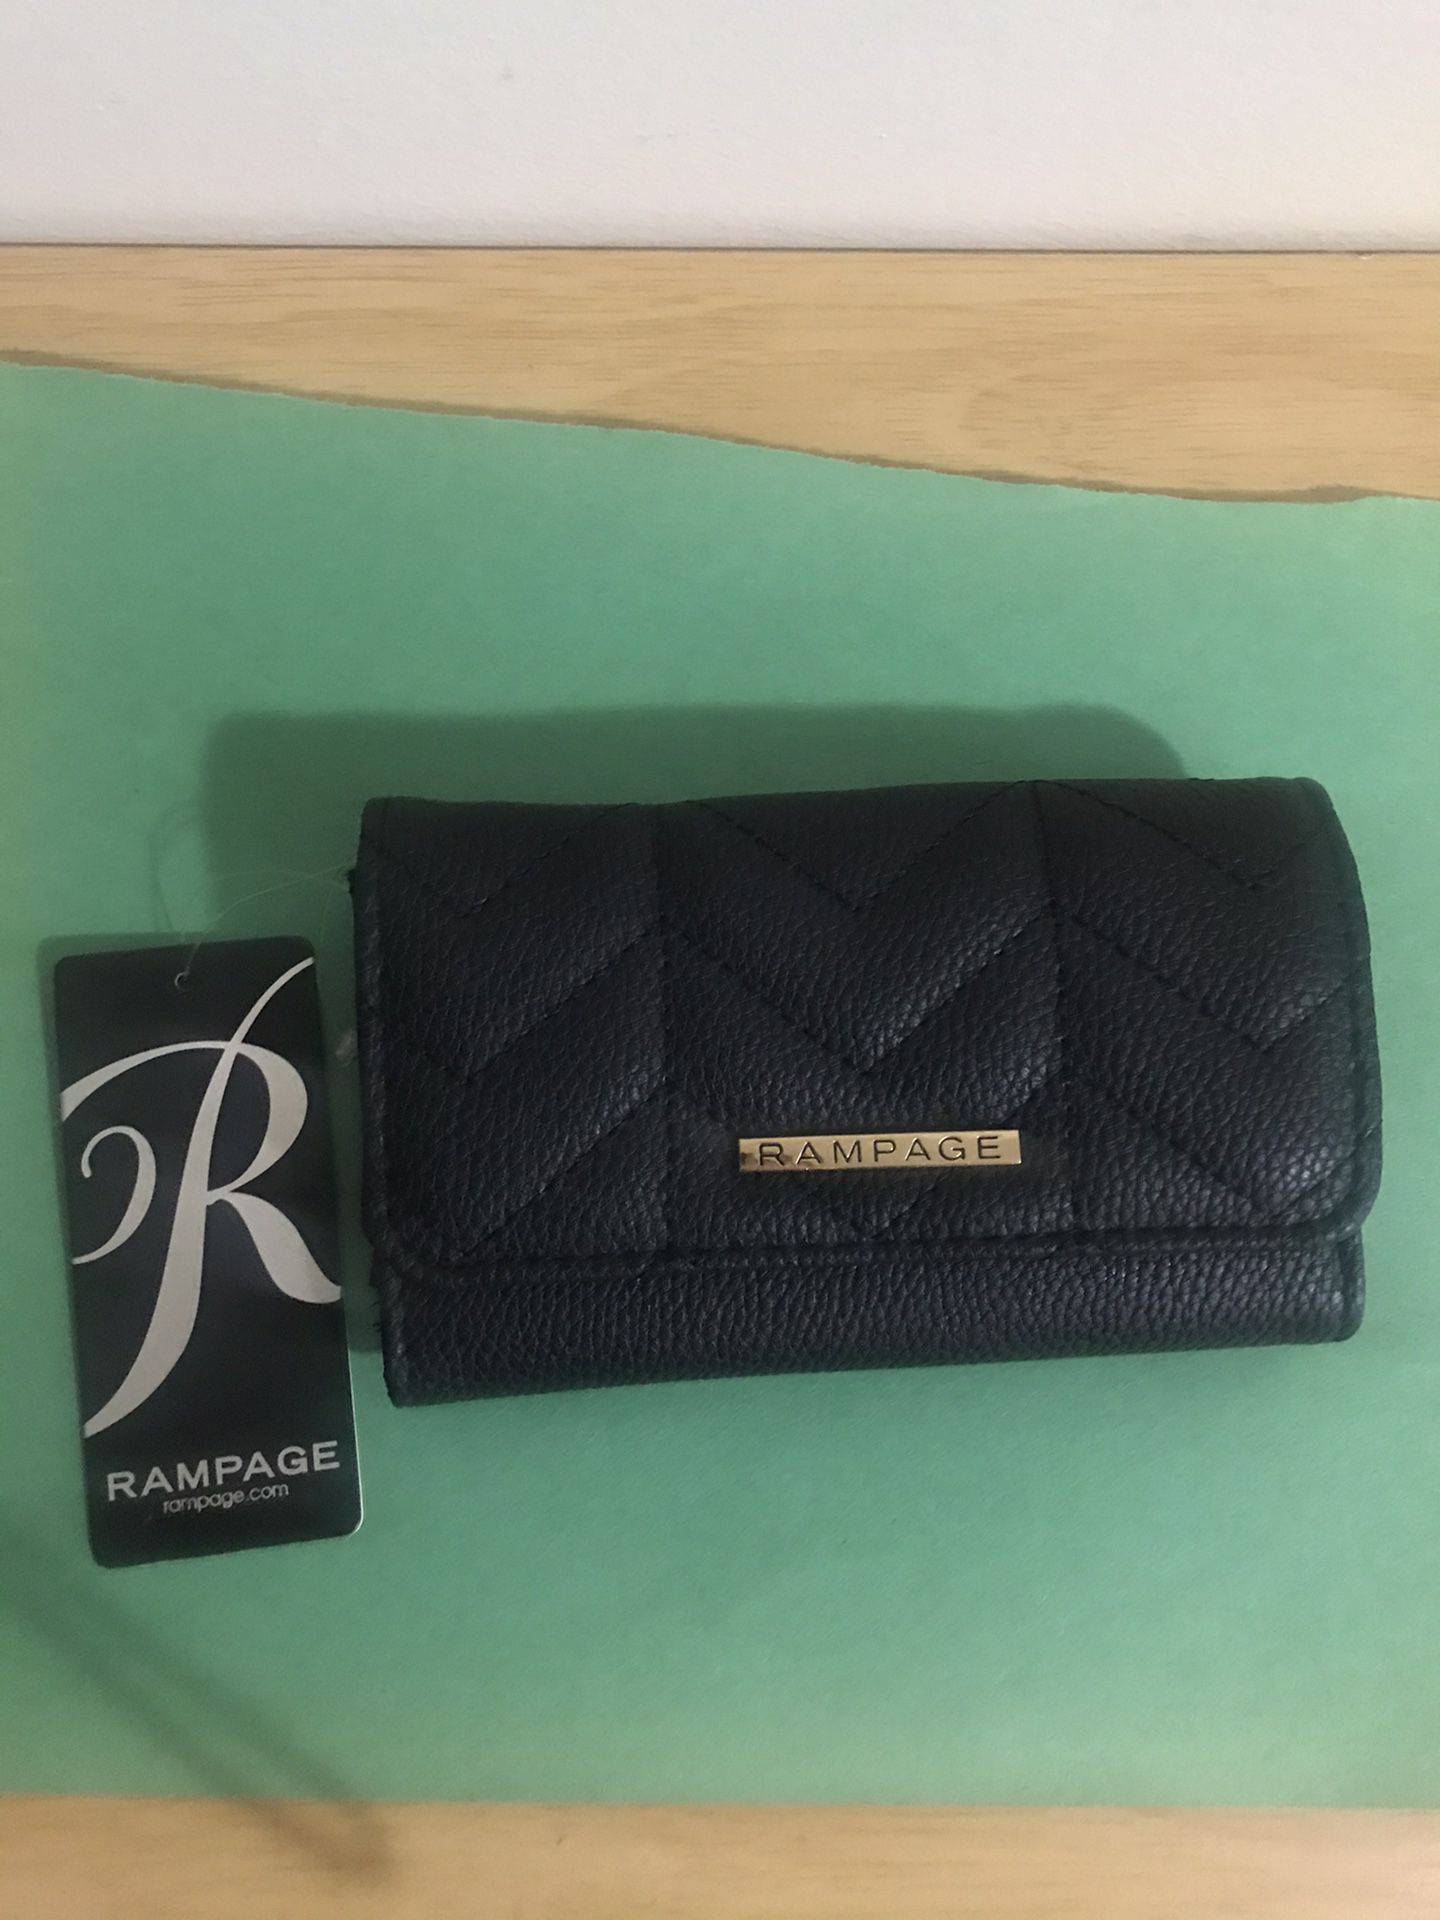 Wallet by Rampage